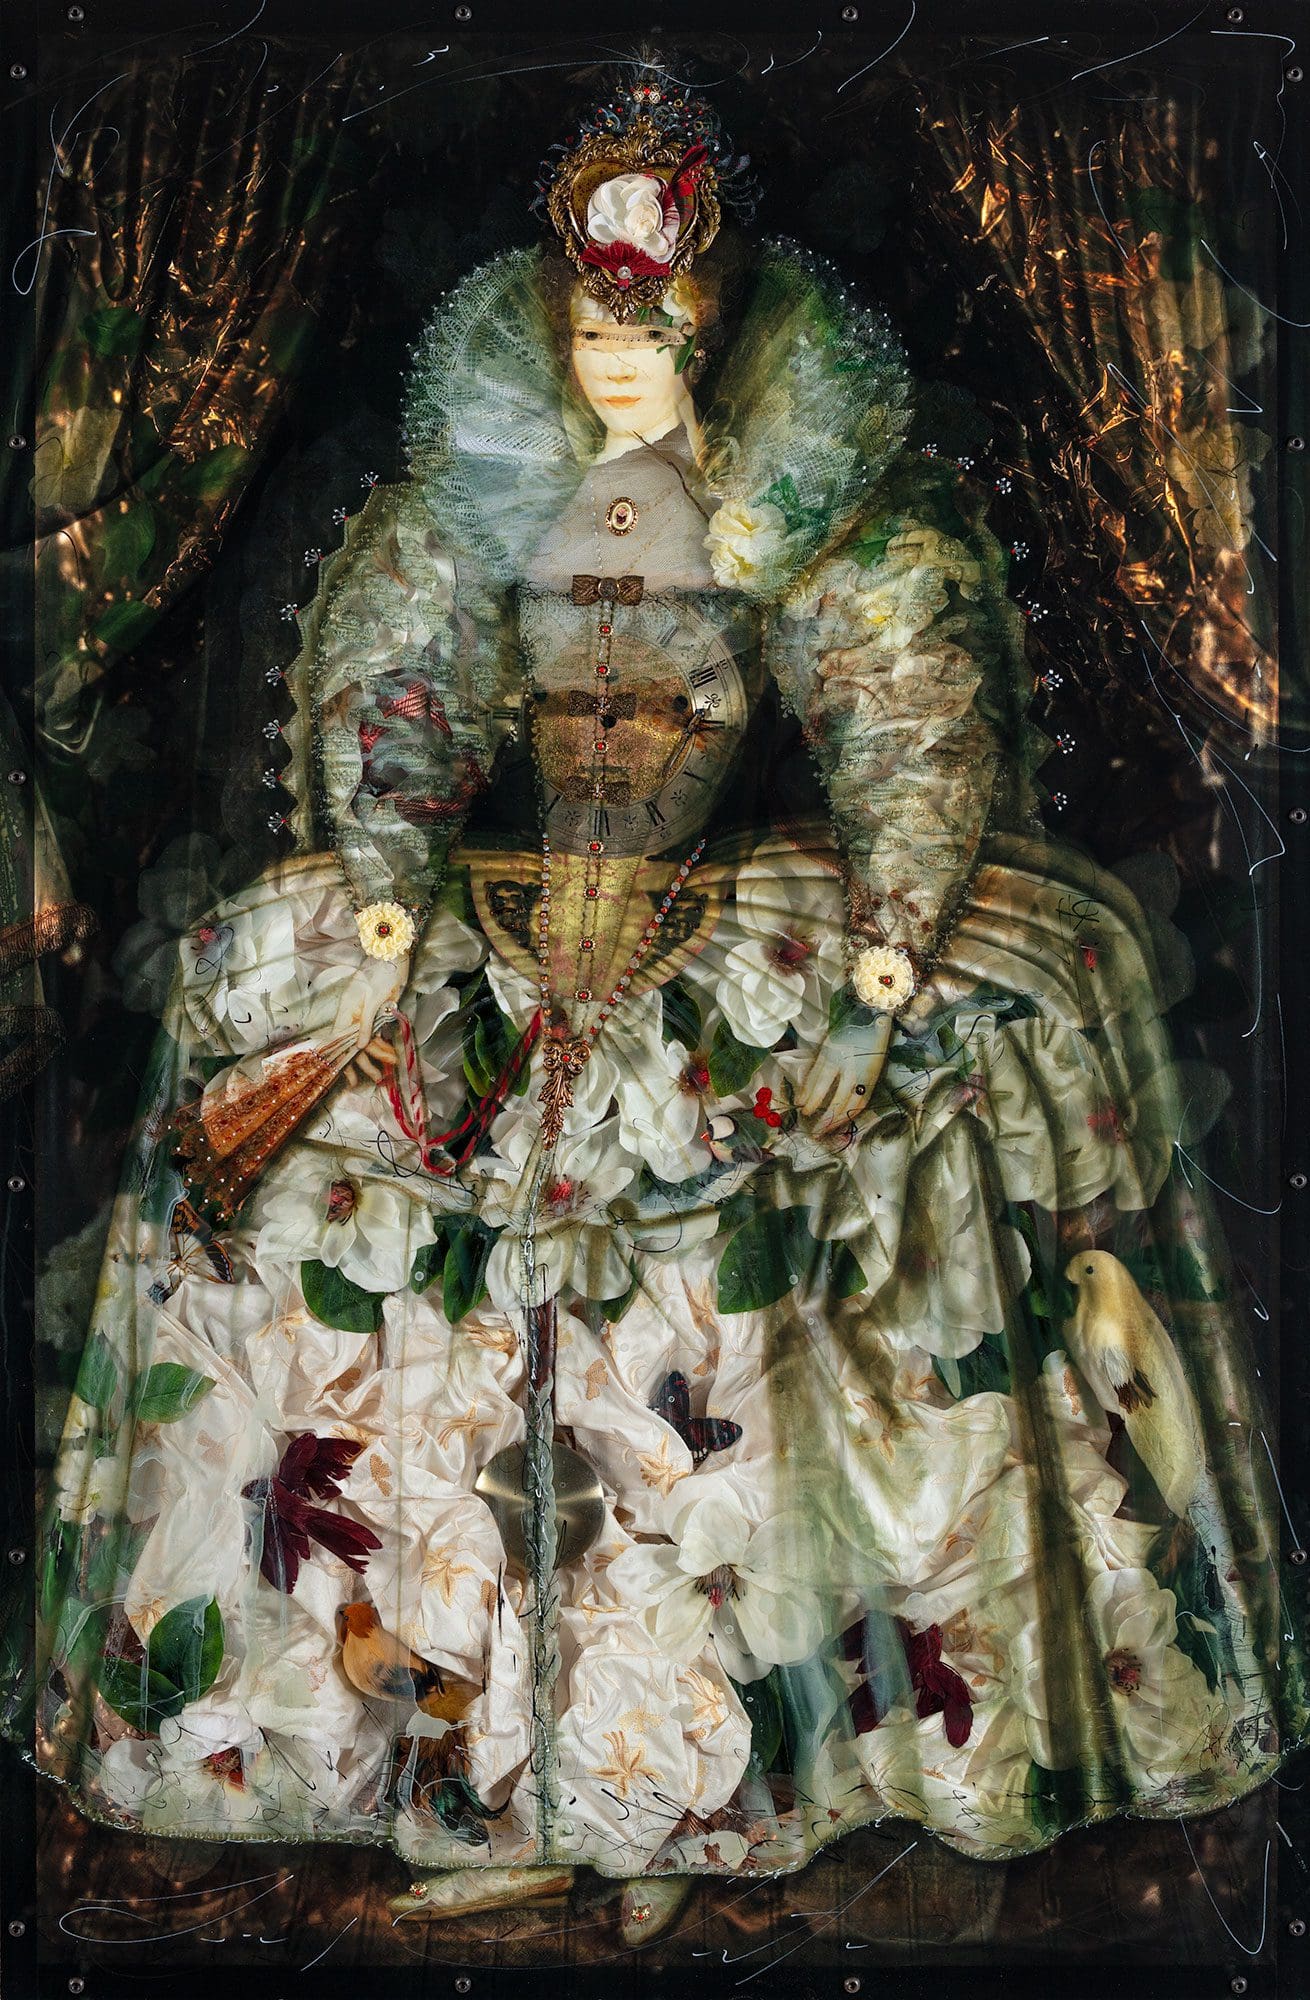 Lady Blossom 57 x 39, Layered Mixed Media with antique objects, butterflies, clock, fabric, etc.